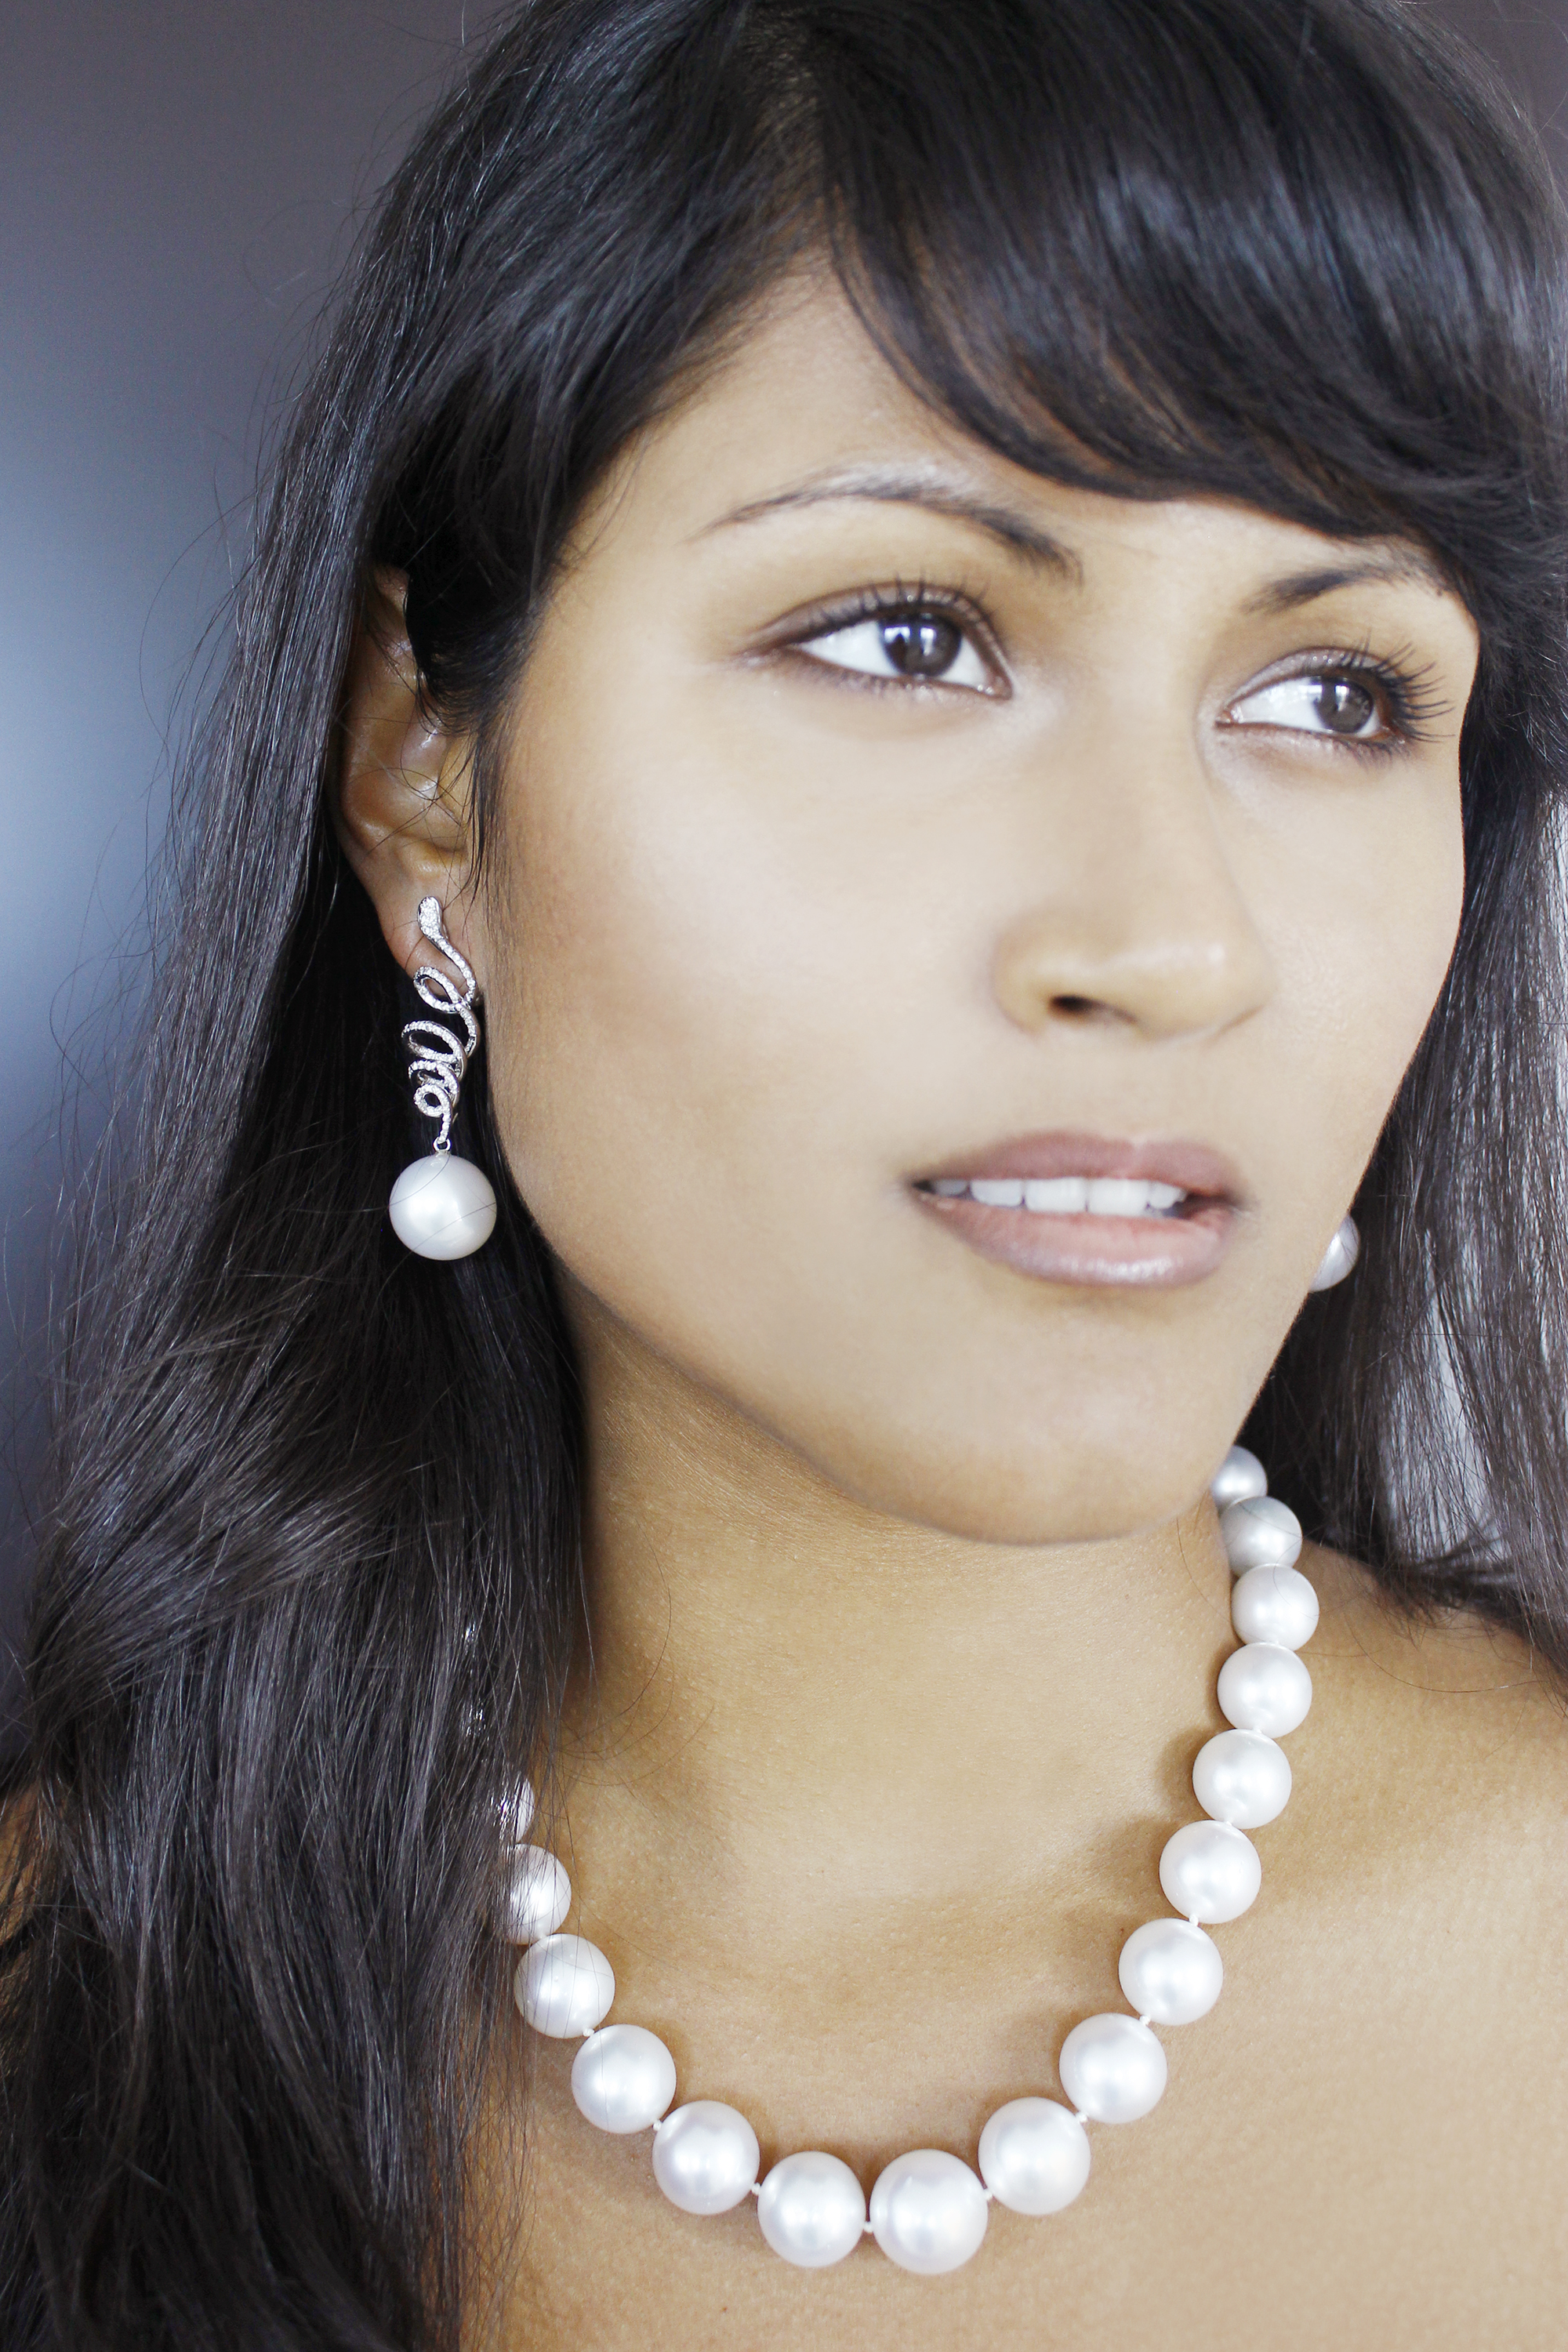 Pearl earring and necklace with diamonds